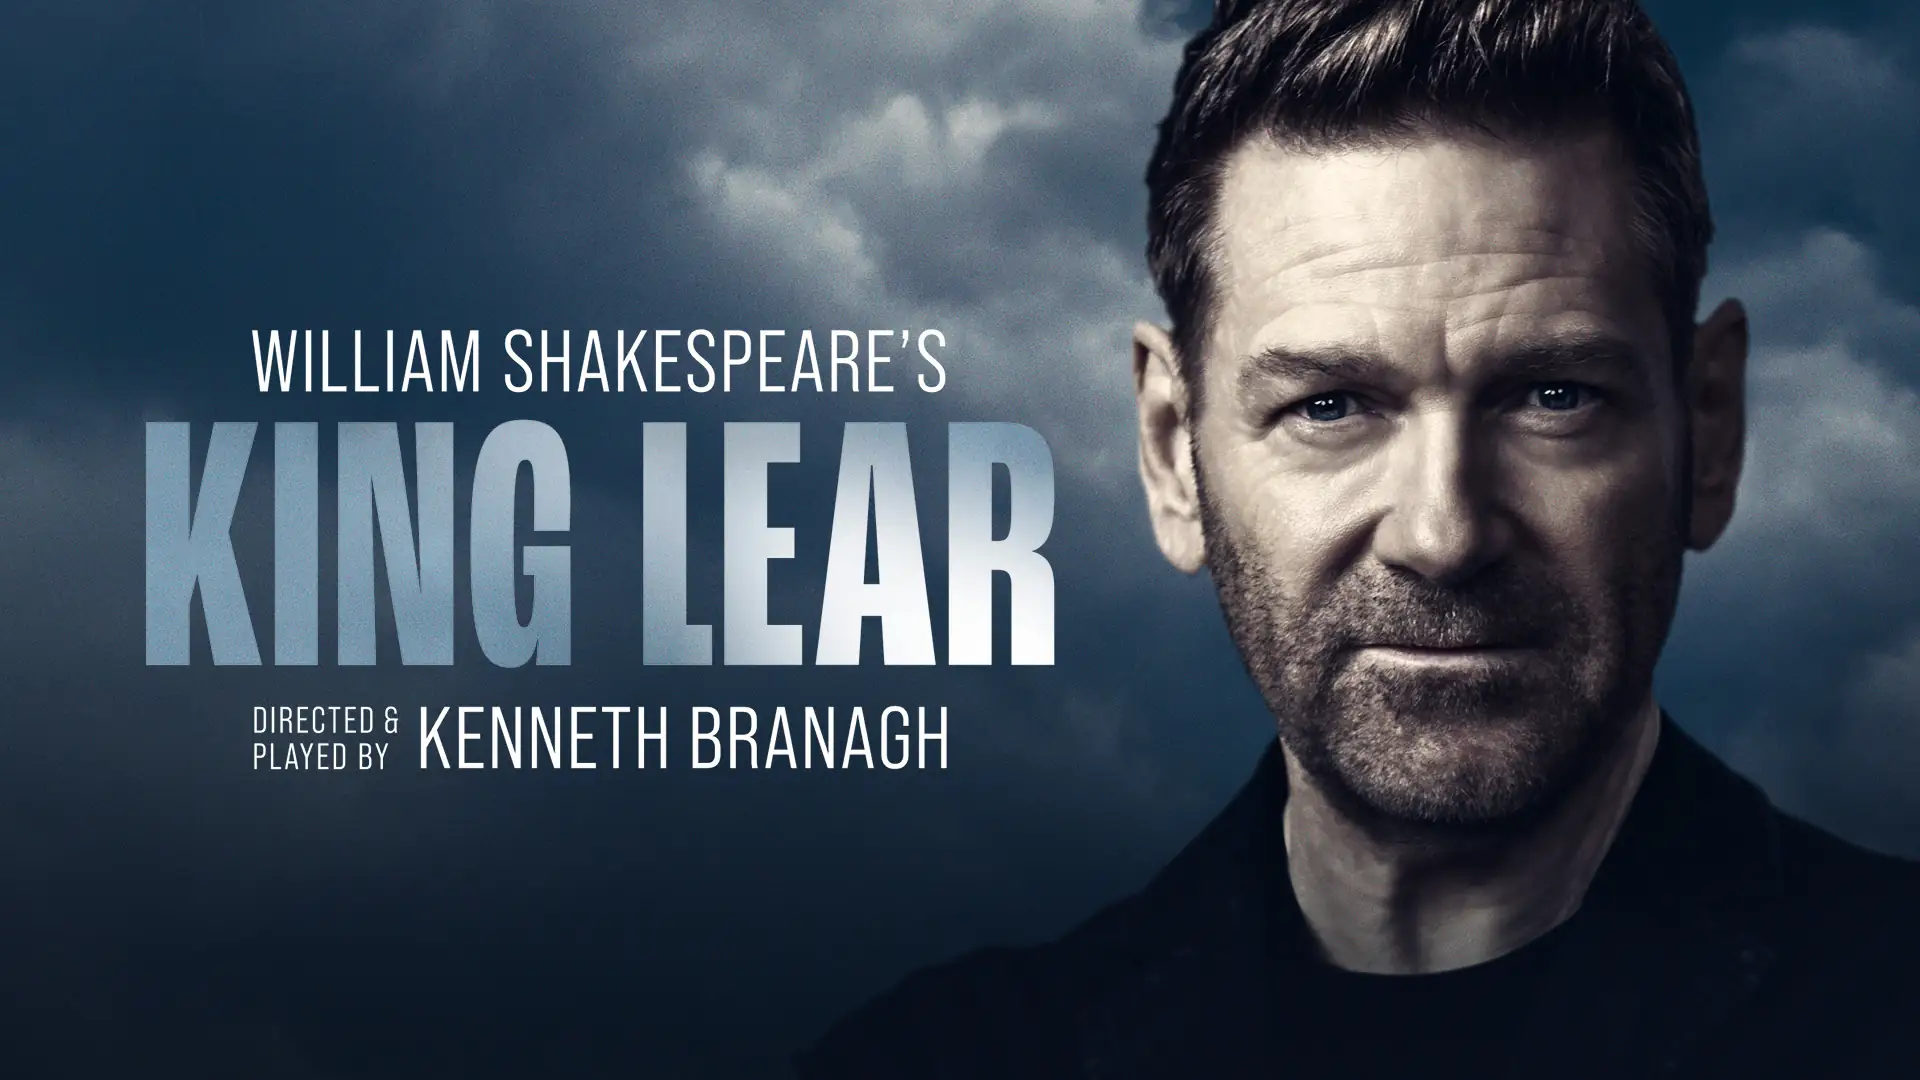 King Lear at Wyndham's Theatre in London's West End